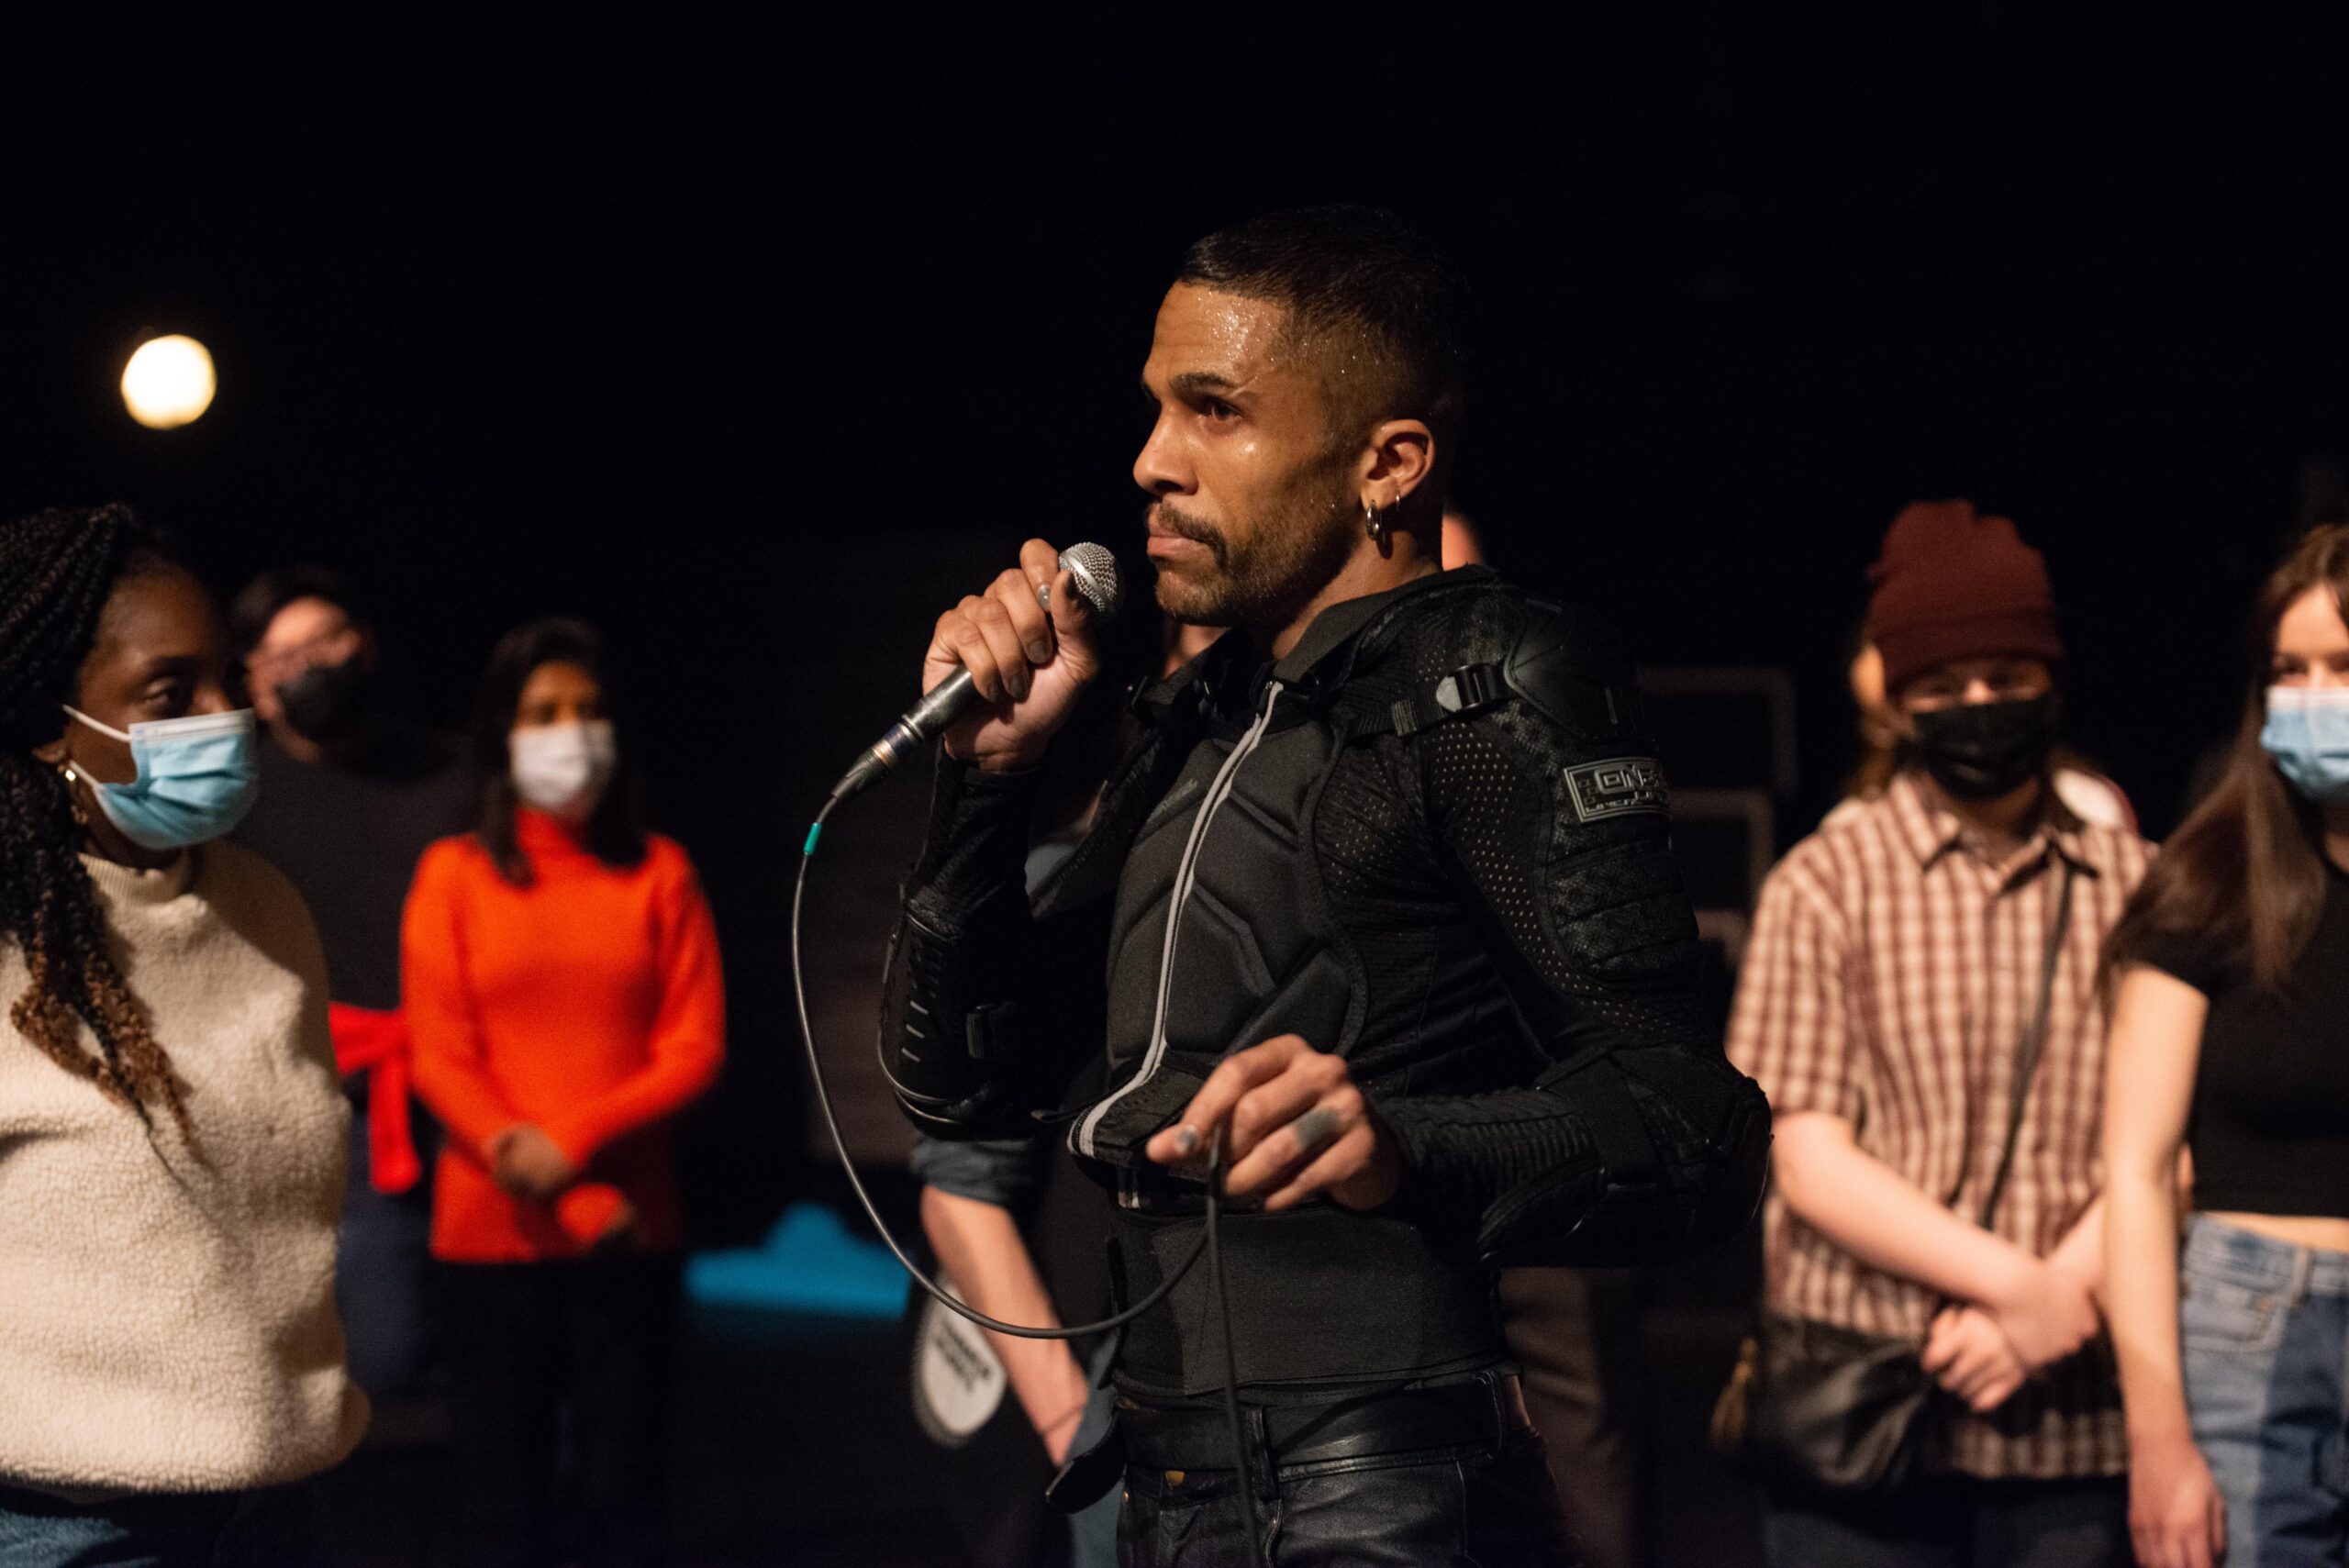 Image of performer holding a microphone, walking among a masked audience, wearing a black jacket.